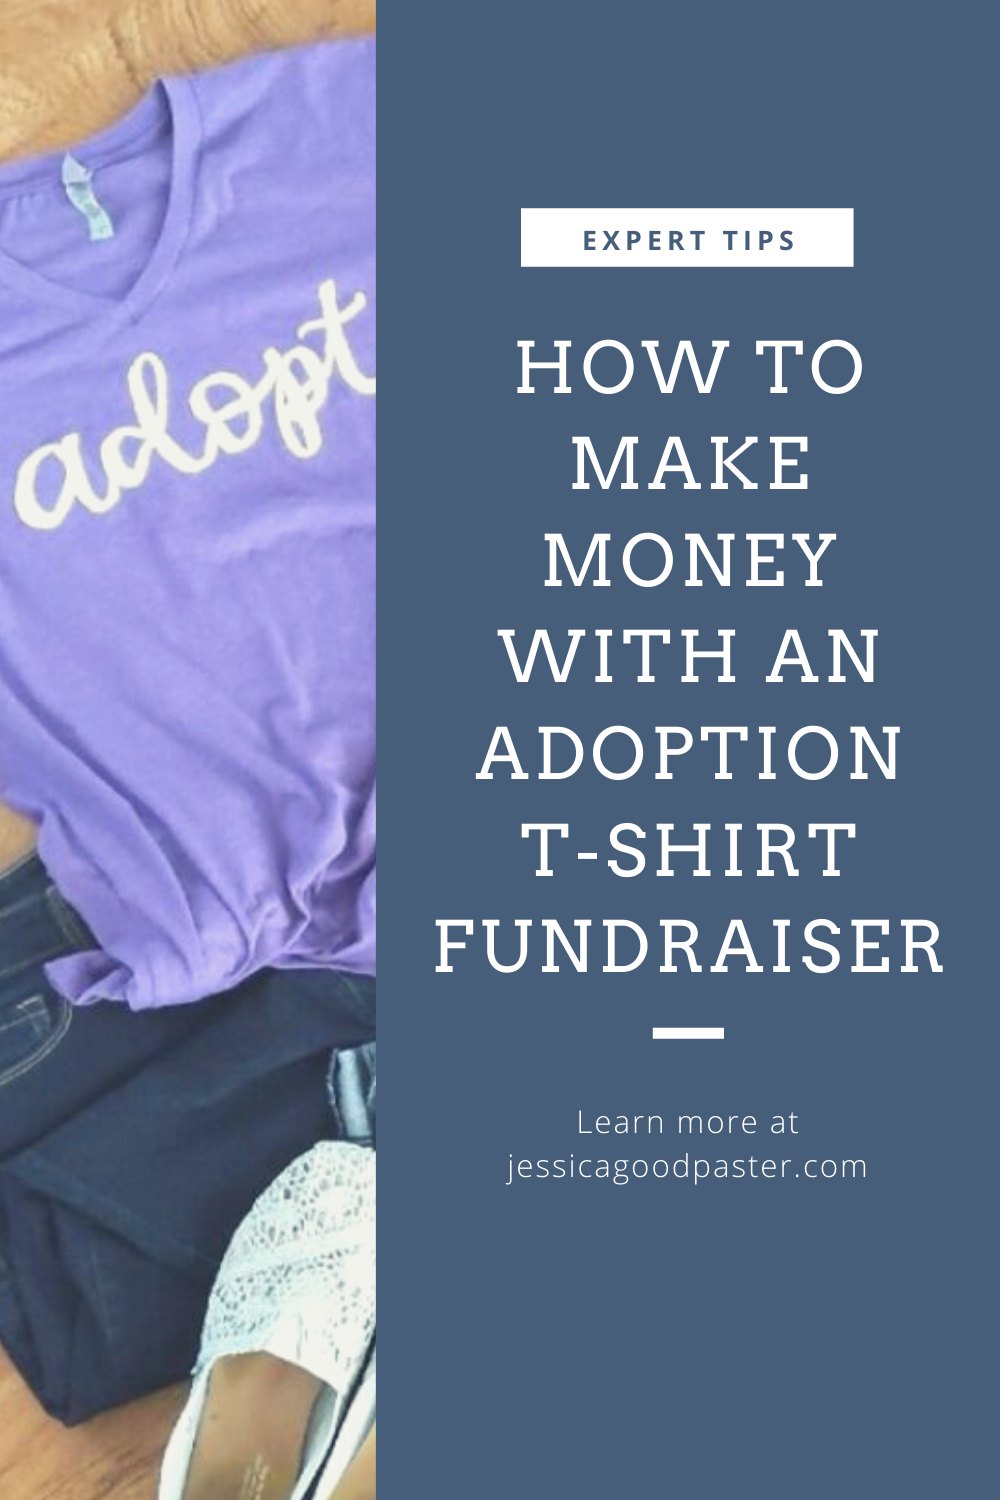 How to Make Money with an Adoption T-Shirt Fundraiser | Tips from expert families and ideas for a successful and profitable way to raise money to adopt. #adoptionhelp #adoption #fundraising #tshirt #fundraiser